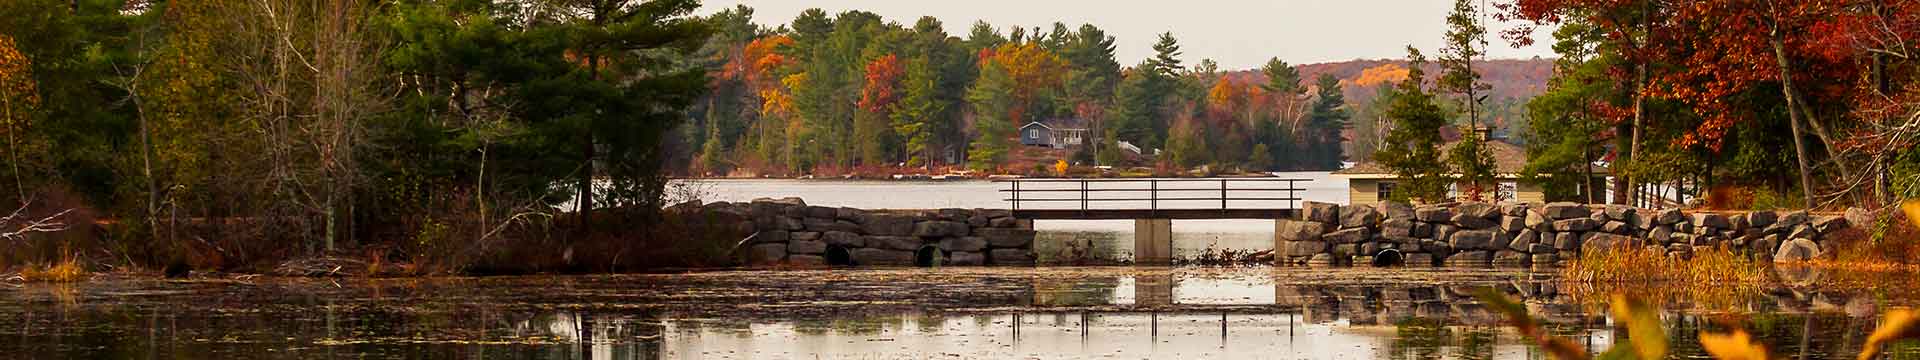 Shoreline showing Fall colours and stone footbridge in the foreground.  Photo credit: John MacLean